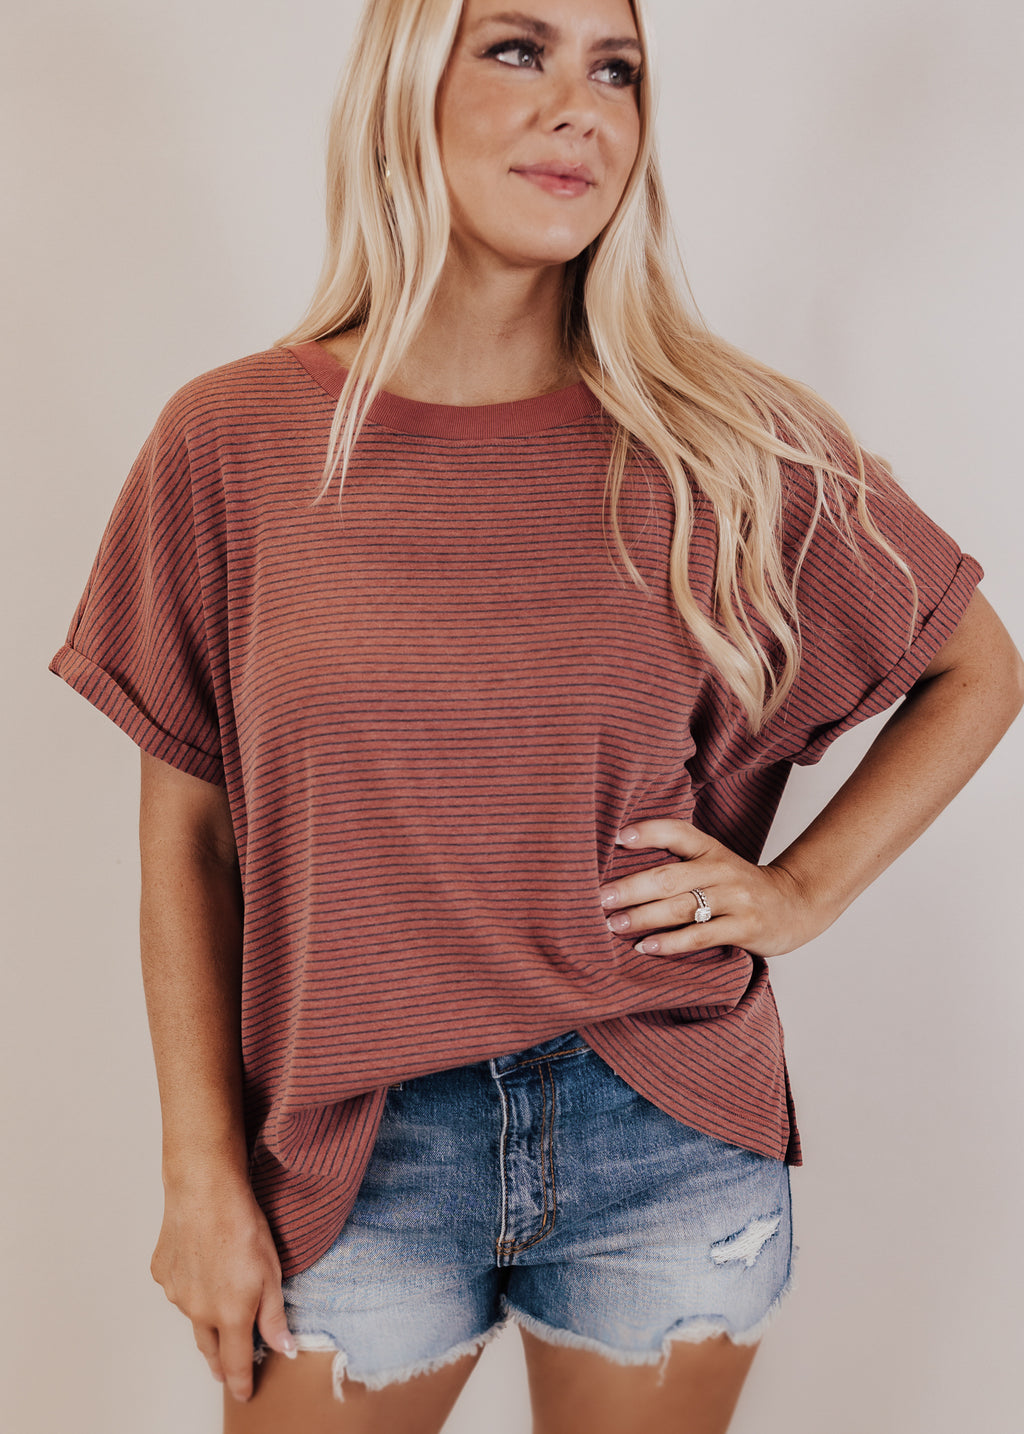 Relaxed Sienna Charcoal Stripe Top